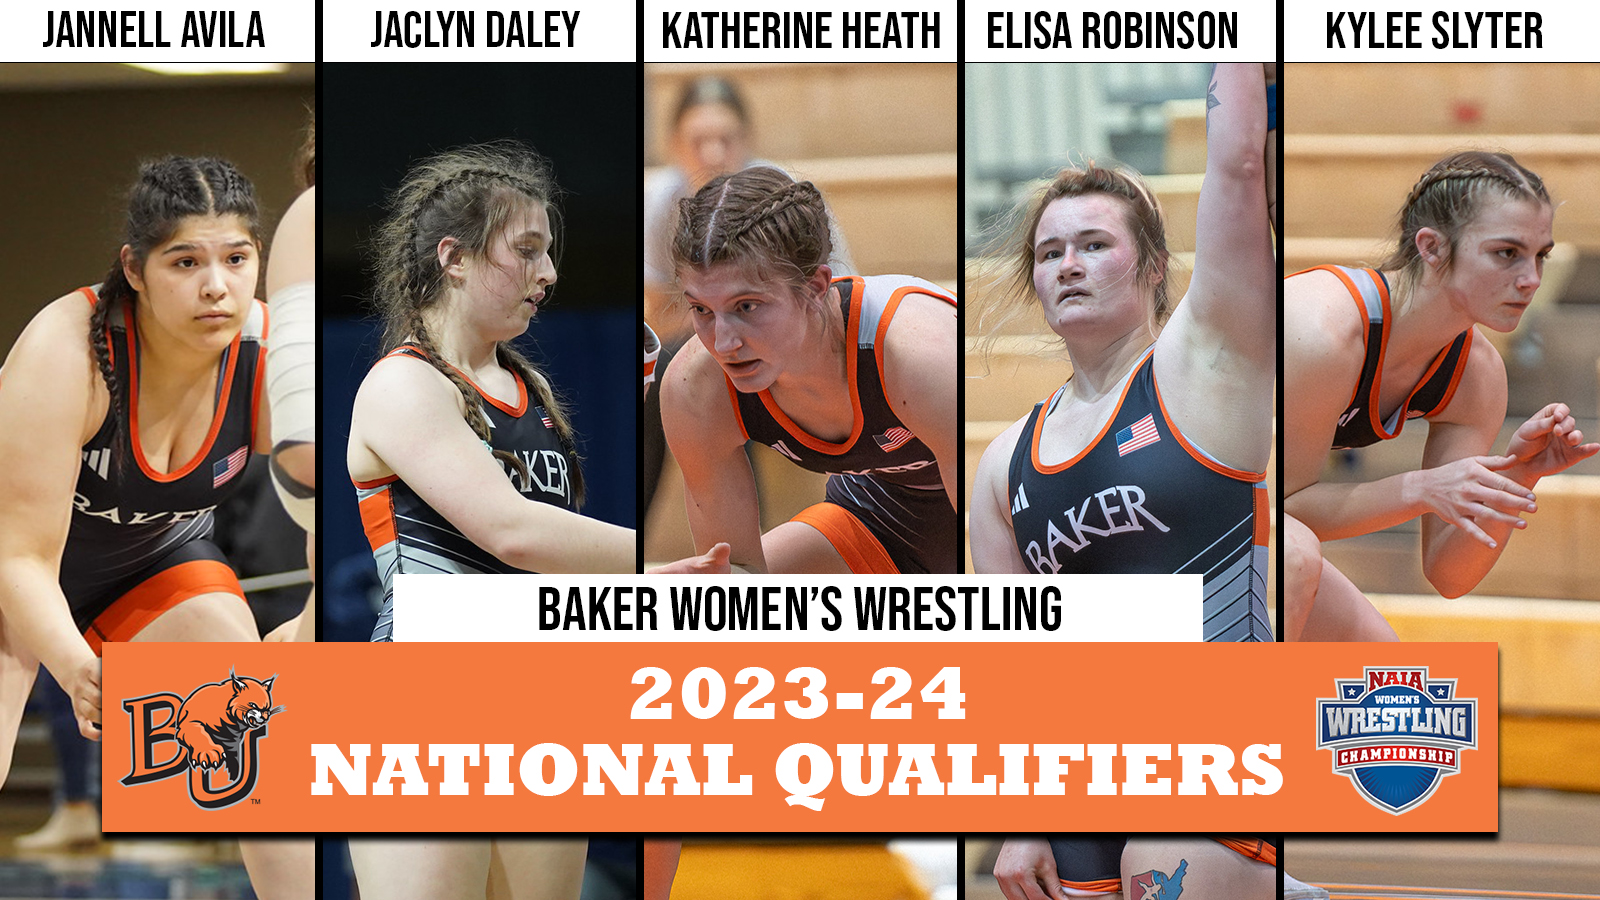 Five Wildcats Ready to Battle at NAIA Women’s Wrestling Championships